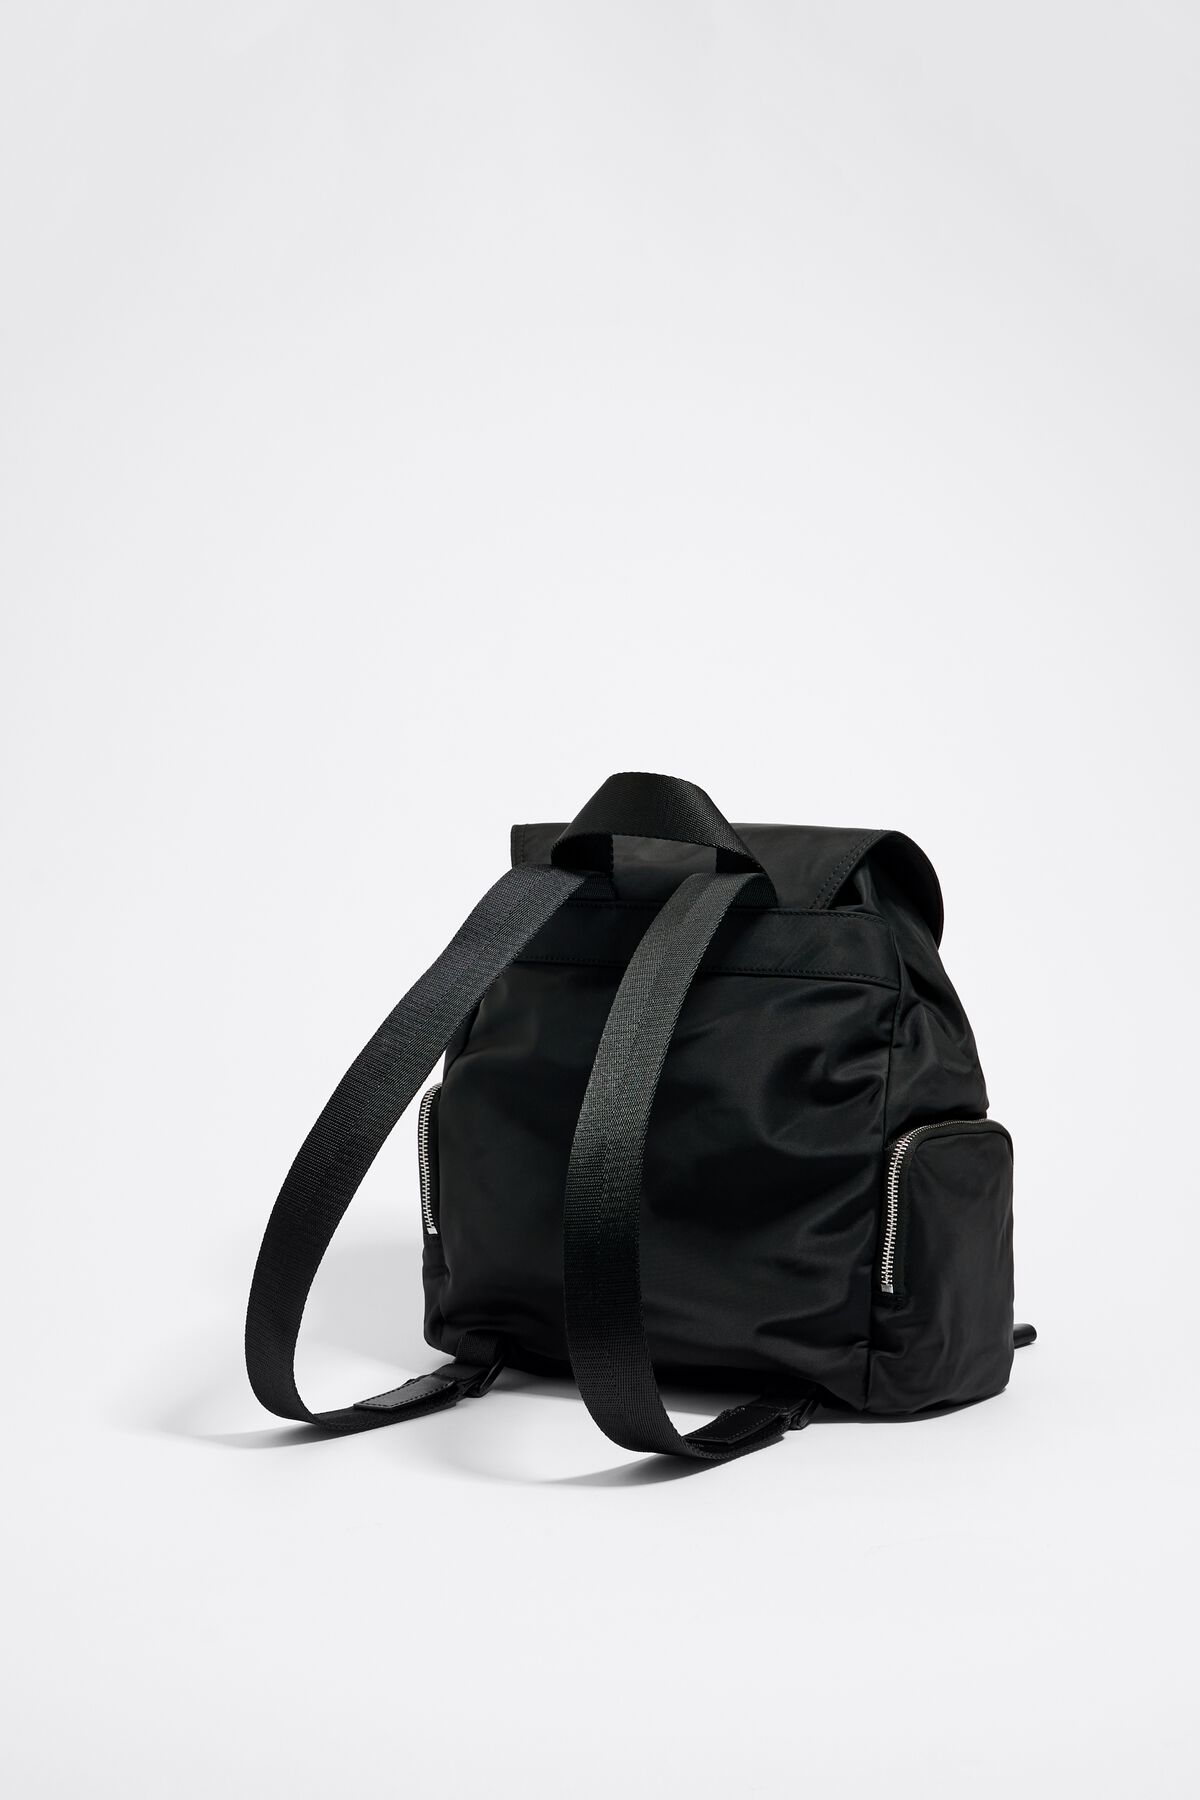 Women's backpacks and bumbags